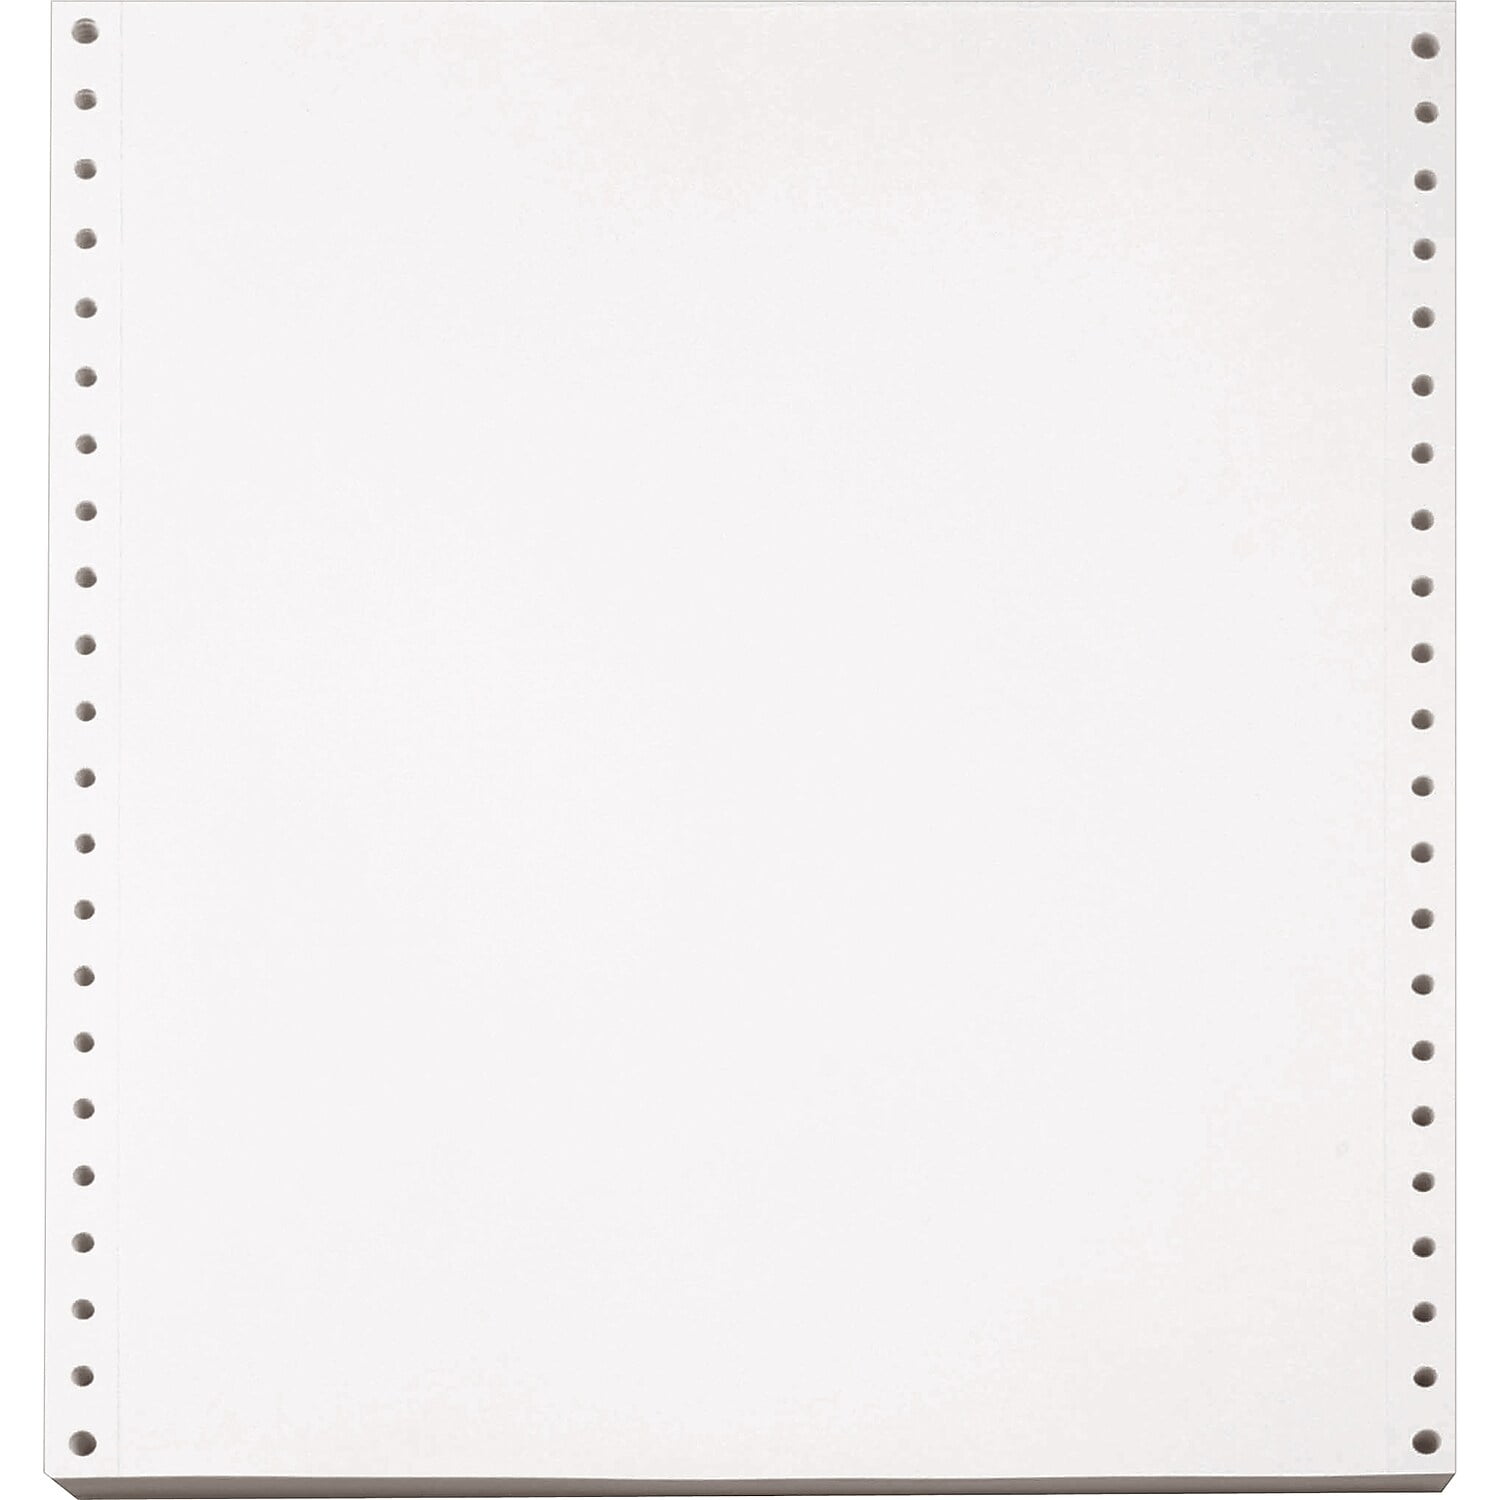 Hydronote Blank Copy Paper, Waterproof and Rip-Resistant, 8.5 inch x 11 inch, 500 Sheets